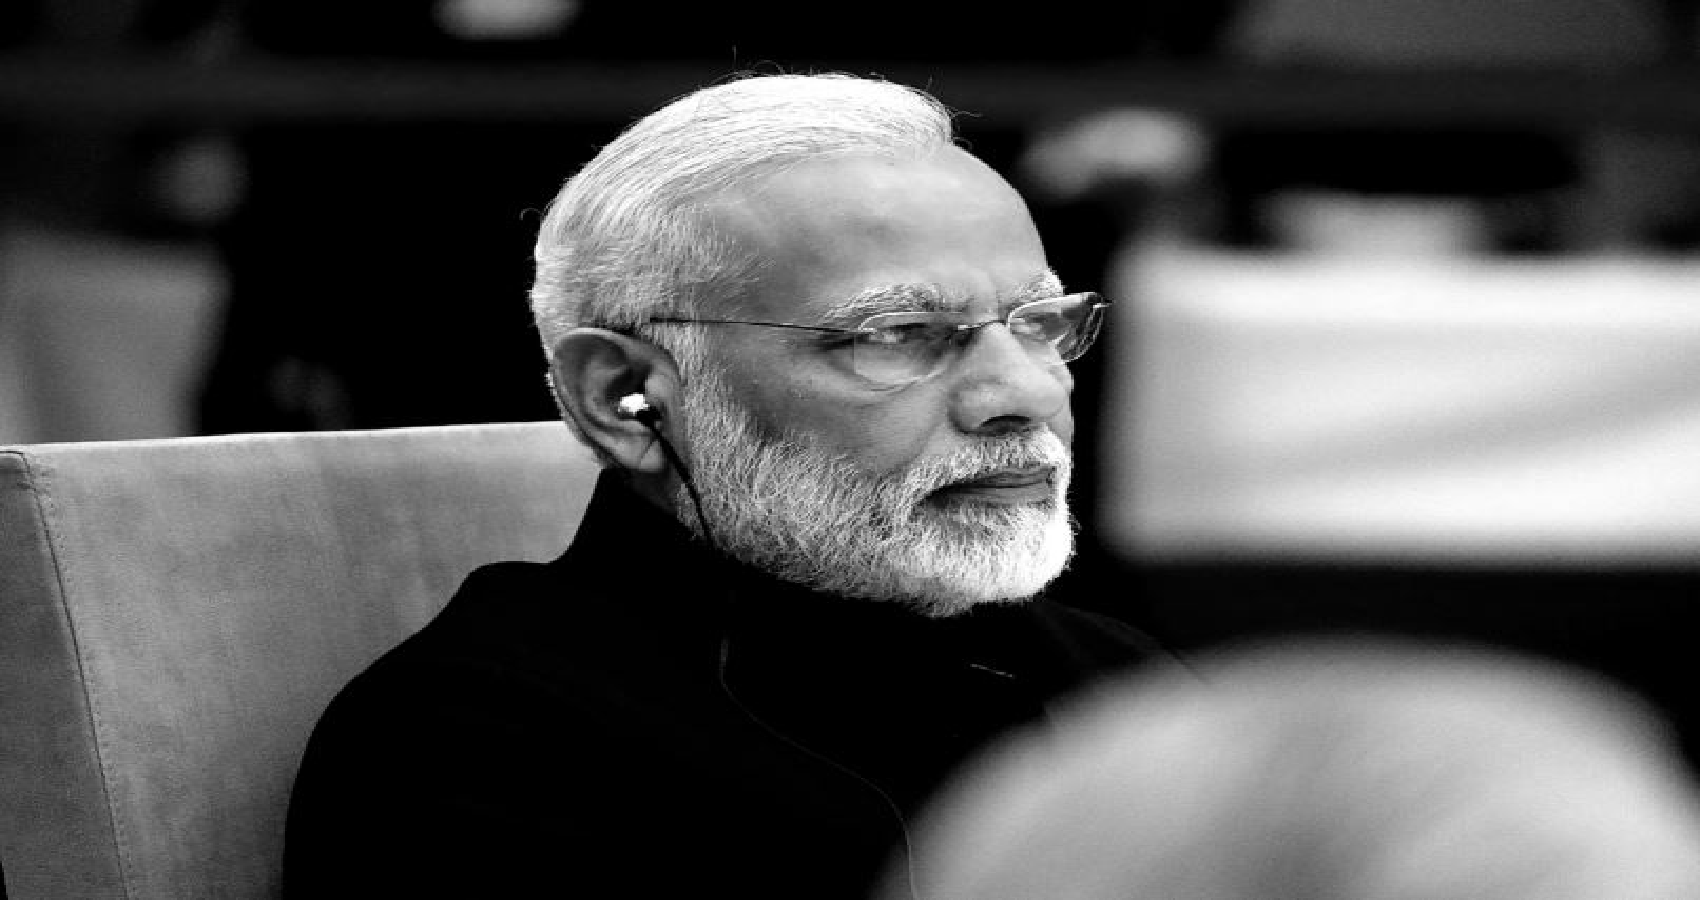 Narendra Modi’s Attempts To Stifle Criticism During Covid Pandemic ‘Inexcusable’: Lancet